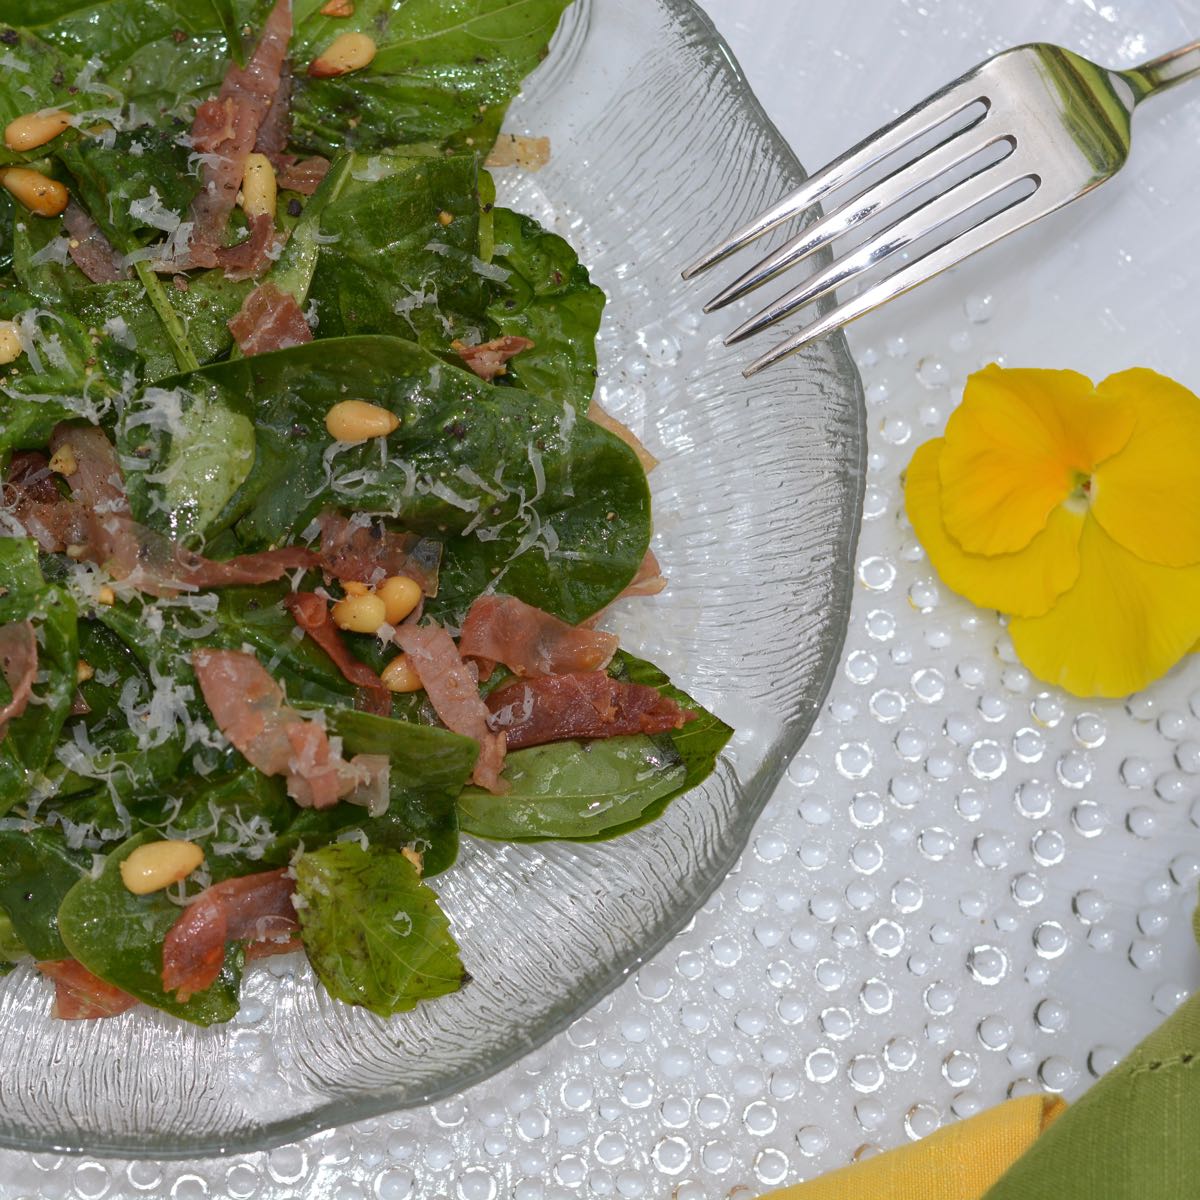 A Warm Spinach Basil Salad on a plate with pine nuts and frizzled prosciutto.